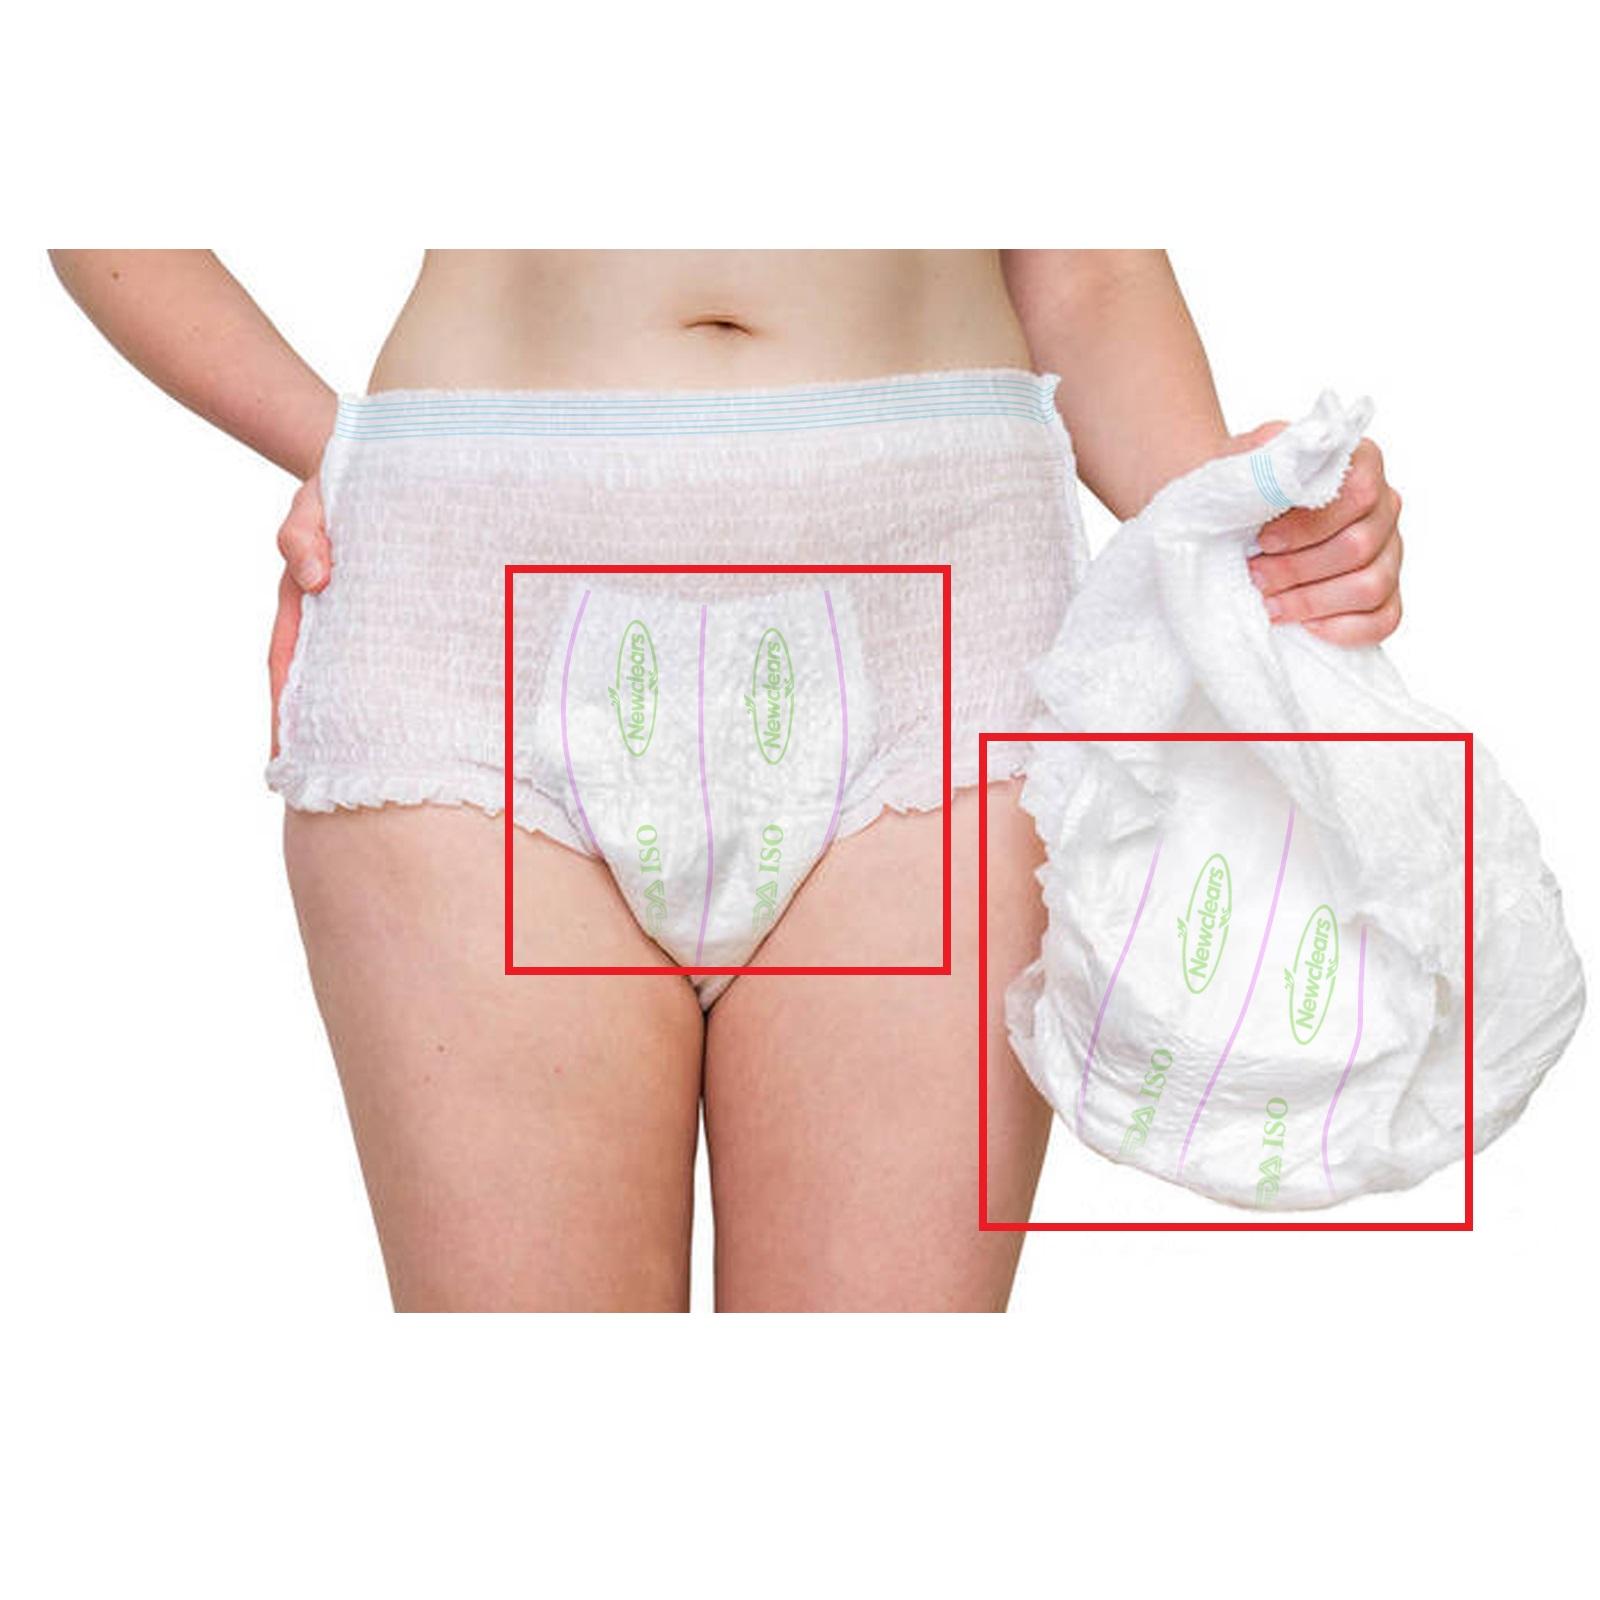  Comfy Life Premium Adult Incontinence Pull Up Diaper